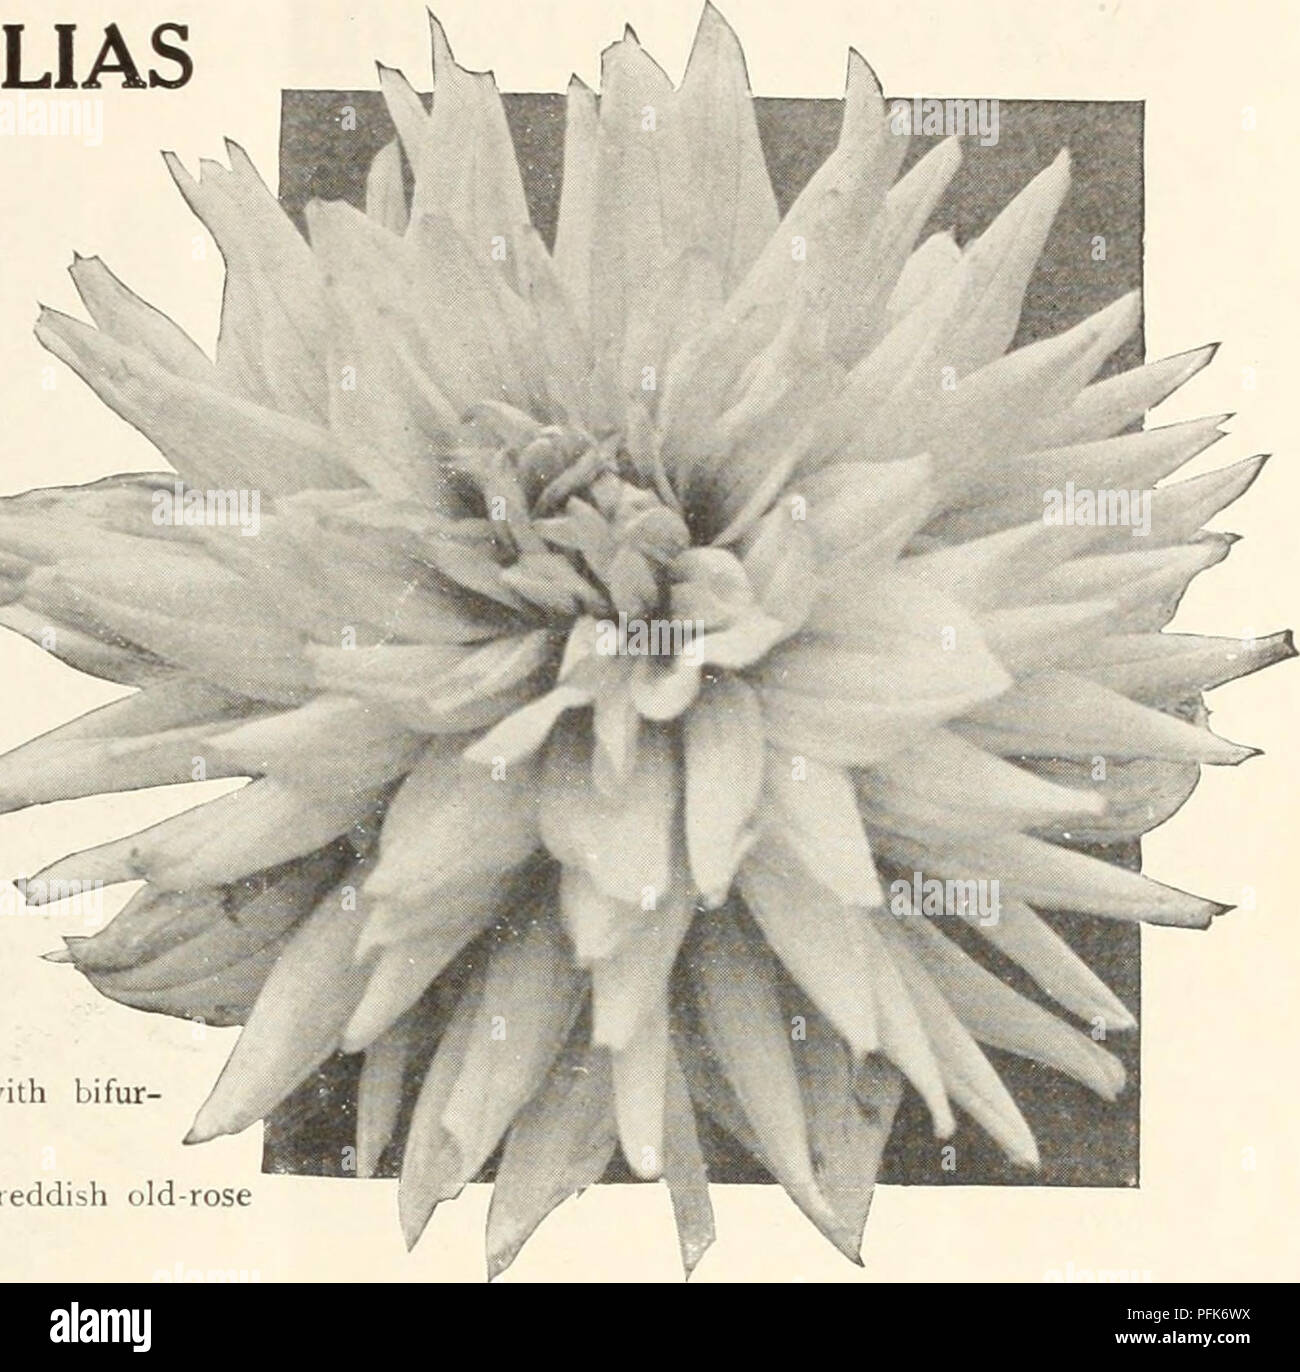 . Dahlias. Flowers Seeds Catalogs; Nurseries (Horticulture) Catalogs; Dahlias Seeds Catalogs. SPECIAL DAHLIA CATALOGUE 11 NEW CACTUS DAHLIAS for 1914 + (Continued) Flagstaff. Rich carmine, tipped rosy mauve wilh yellow centre. t' Gluckskind. One of the very free-flowering varie- ties. A delicate soft pink with salmon suffusion; good stems, fine for cutting. Plants ready April 15th. Golden Plover, A splendid exhibition flower ' of neat and most precise incurved form, of a soft tint of lemon-yellow, the reverse of the petals tinted rose. Plants ready April 1.5lh. Hildegard Kusell. Medium-sized f Stock Photo